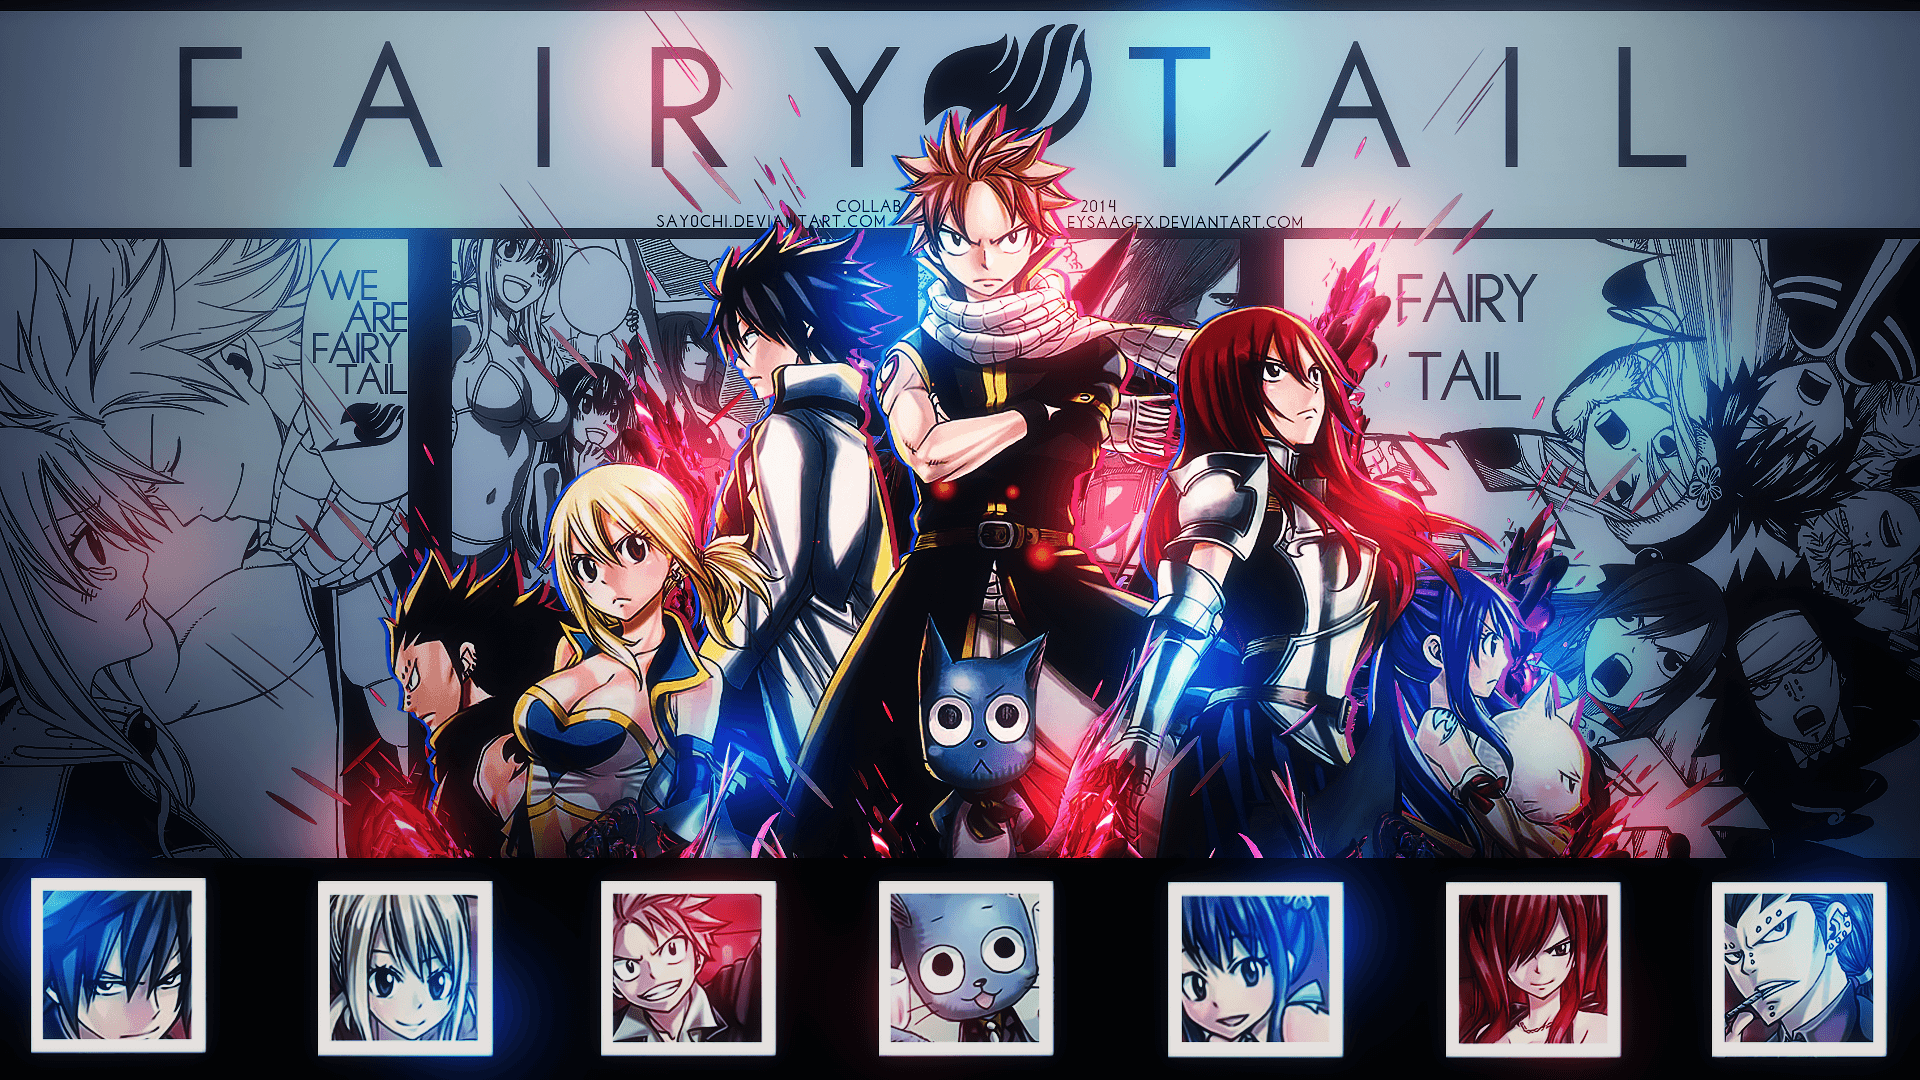 Fairy Tail Anime Wallpaper,HD Anime Wallpapers,4k Wallpapers,Images, Backgrounds,Photos and Pictures